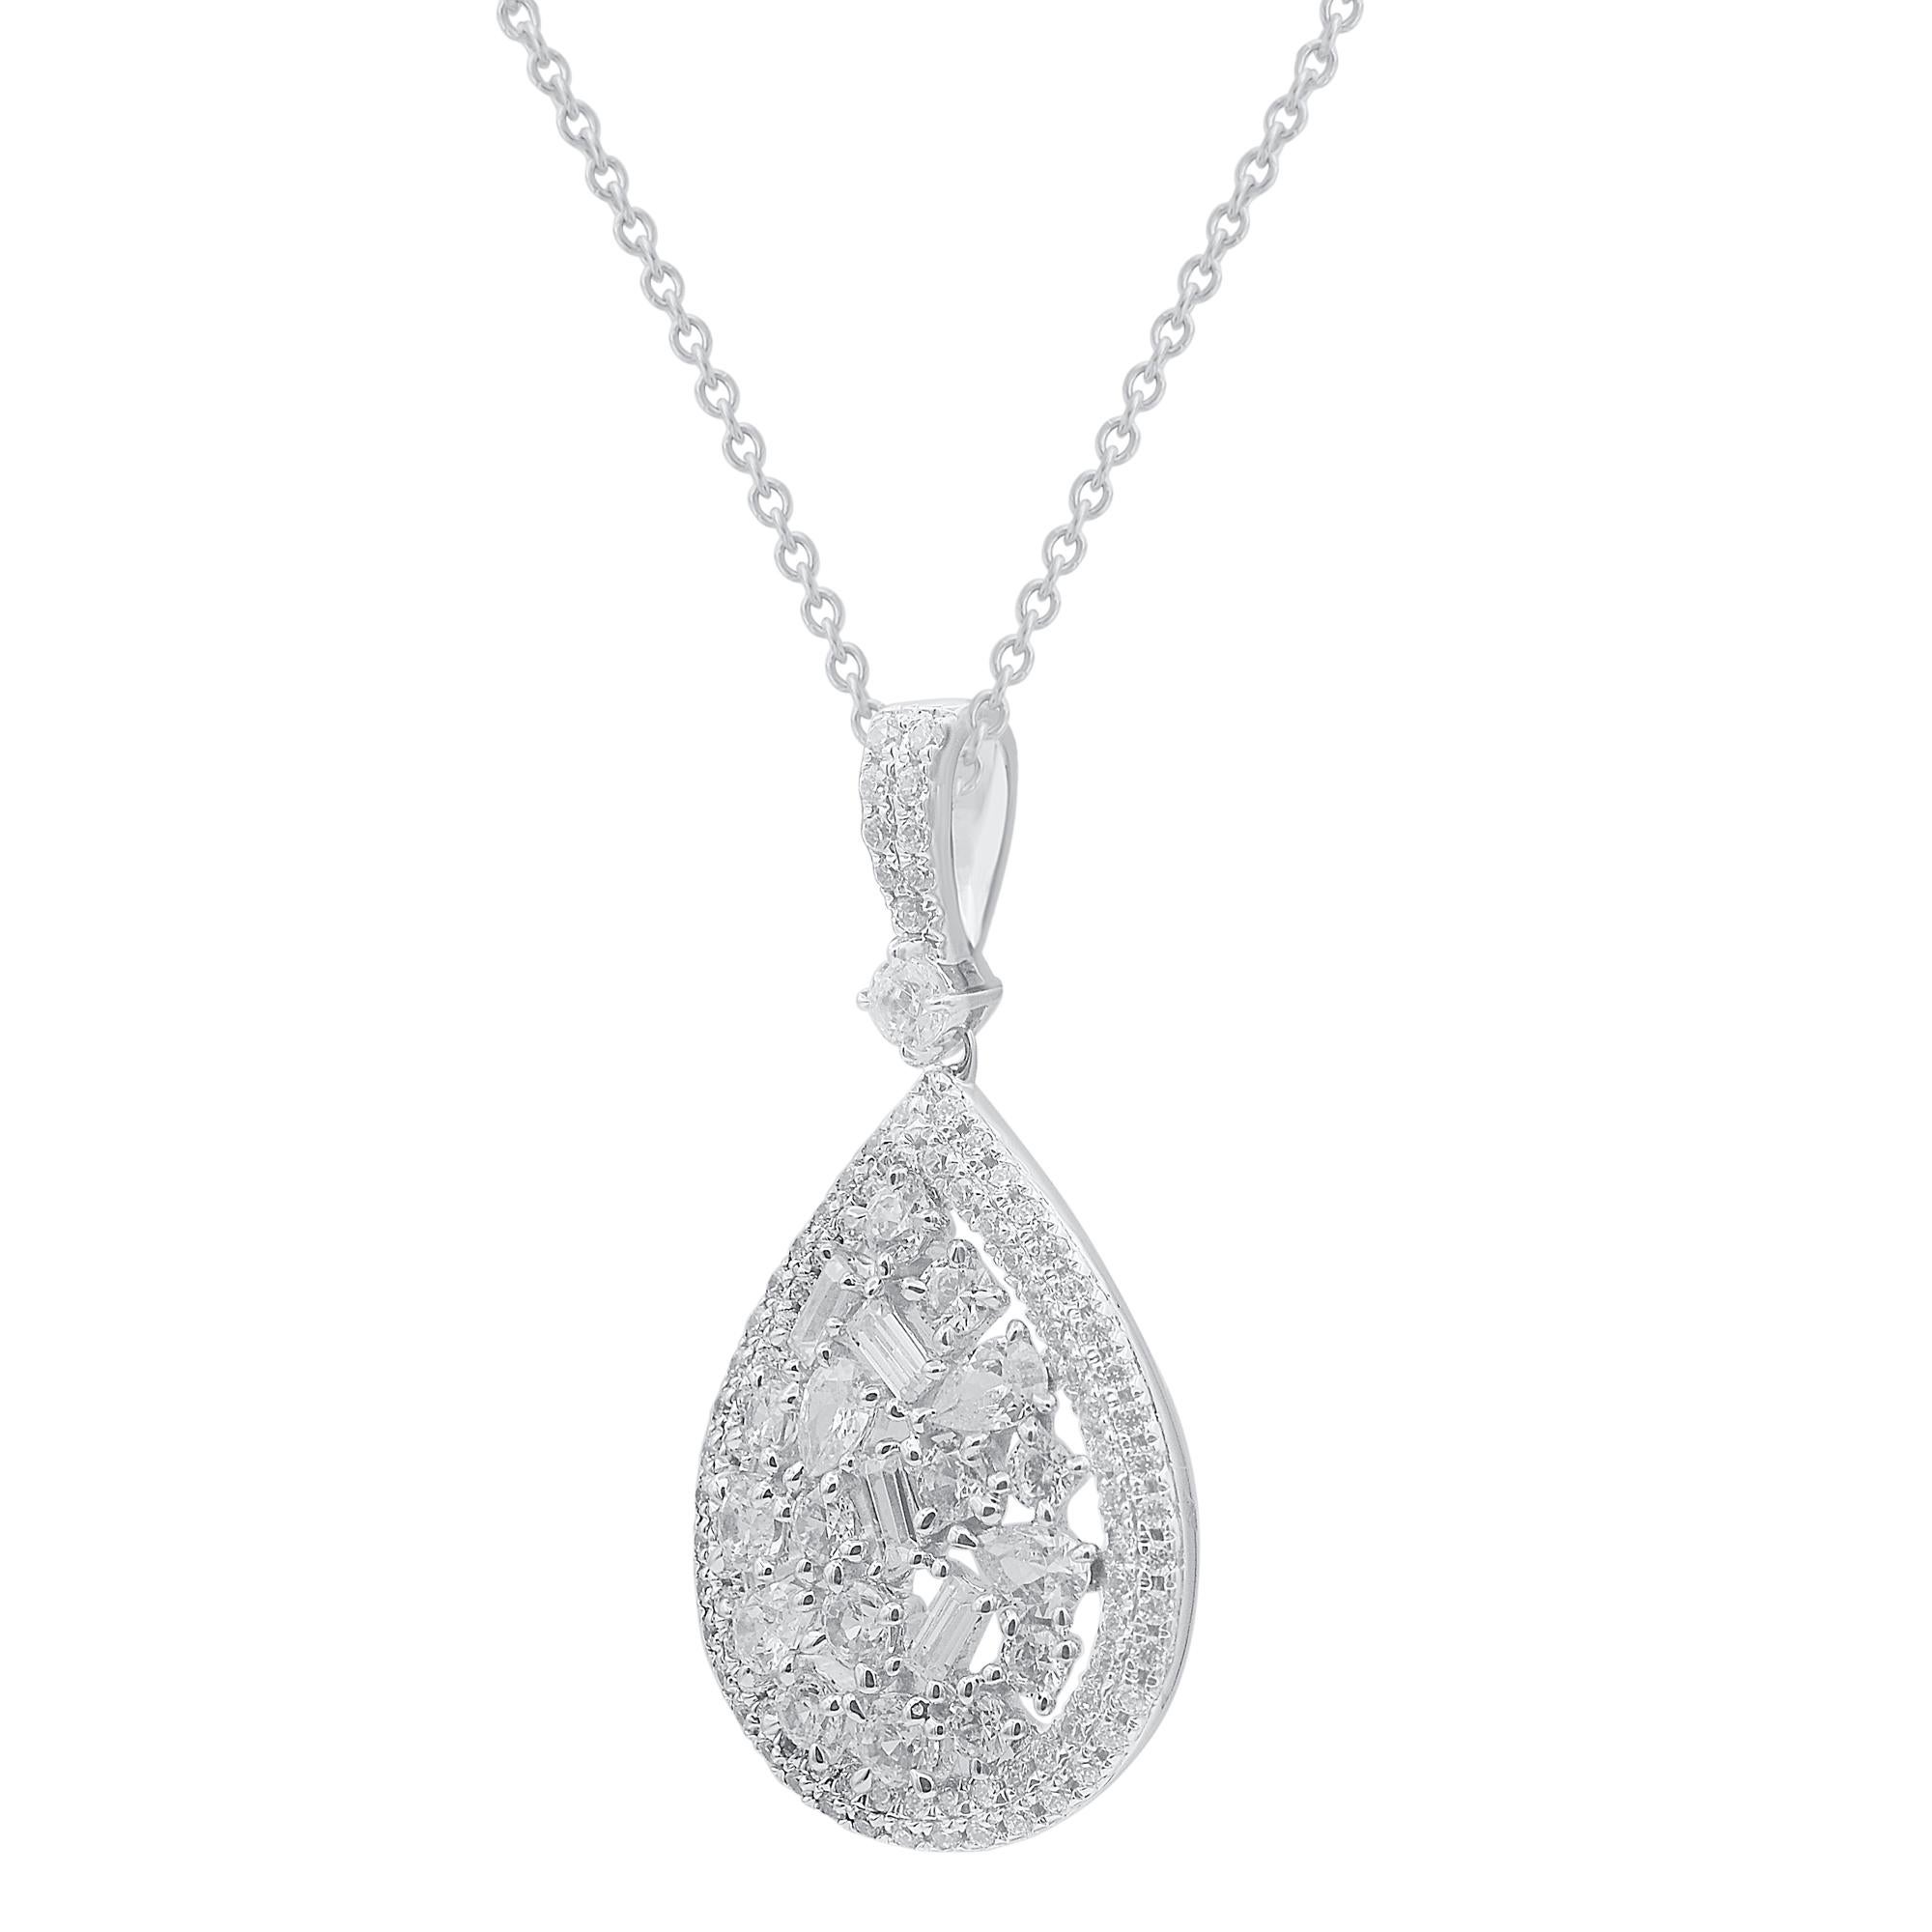 Top off your casual or dressy look with this splendid diamond pendant. These teardrop pendant are studded with 113 pcs Pear, Baguette, Brilliant Cut natural diamonds in prong setting in 18Kt white gold. Total diamond weight is 1.0 carat. Diamonds